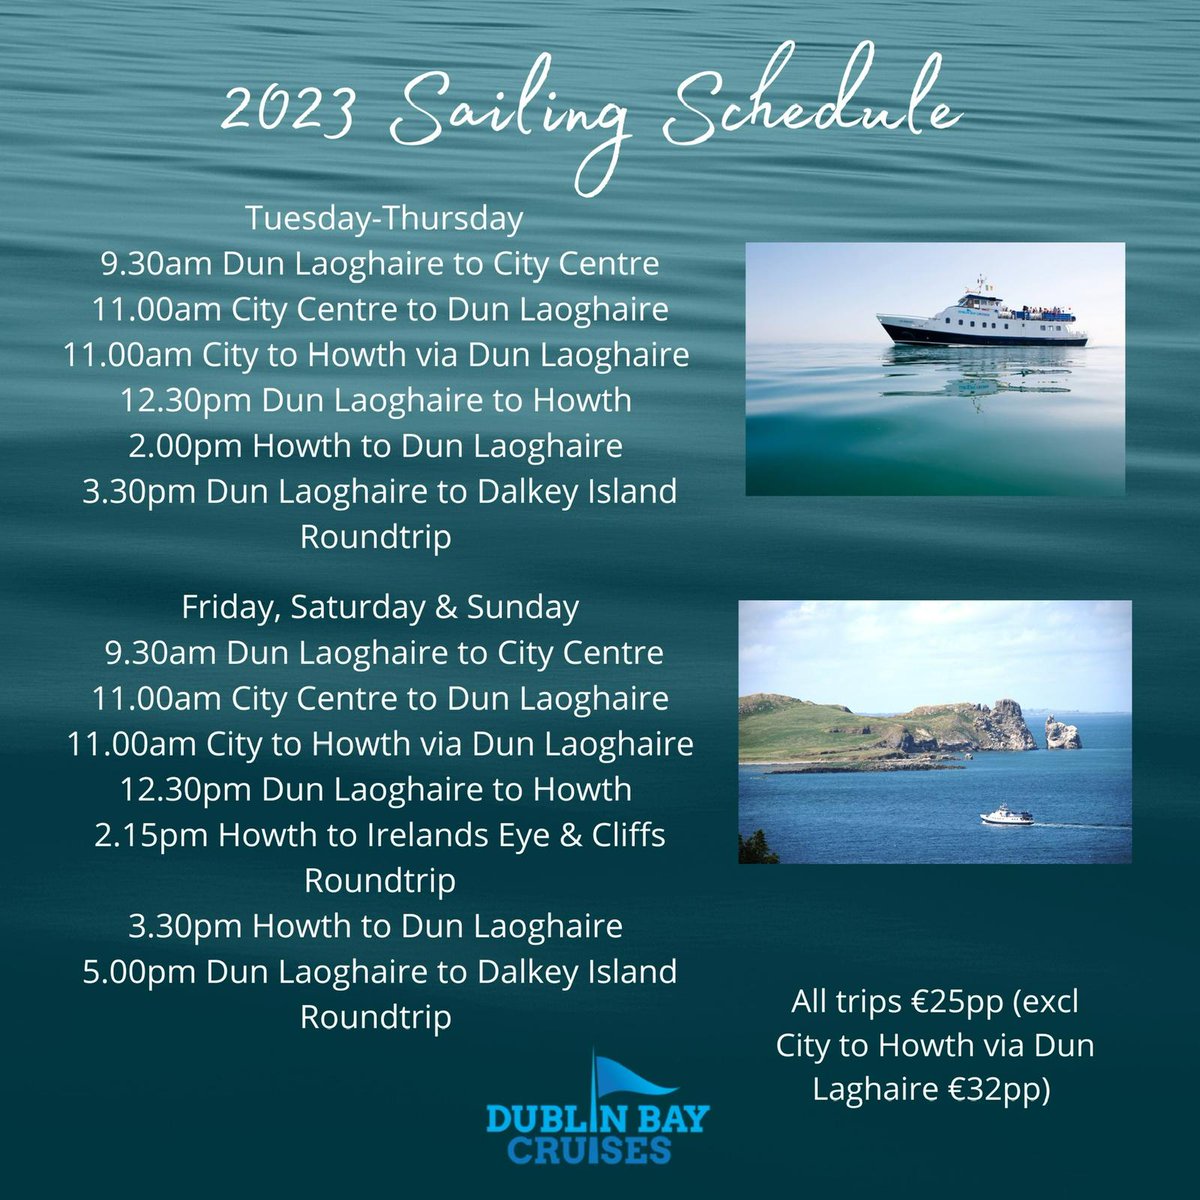 Summer memories are made at sea! Bring your family, your friends AND your dog. All welcome. 

Book your Bay Cruise today and join us onboard @DublinBayCruise.

 dublinbaycruises.rezgo.com

#dublinbaycruises #dublinbay #family #summer #welovedogs